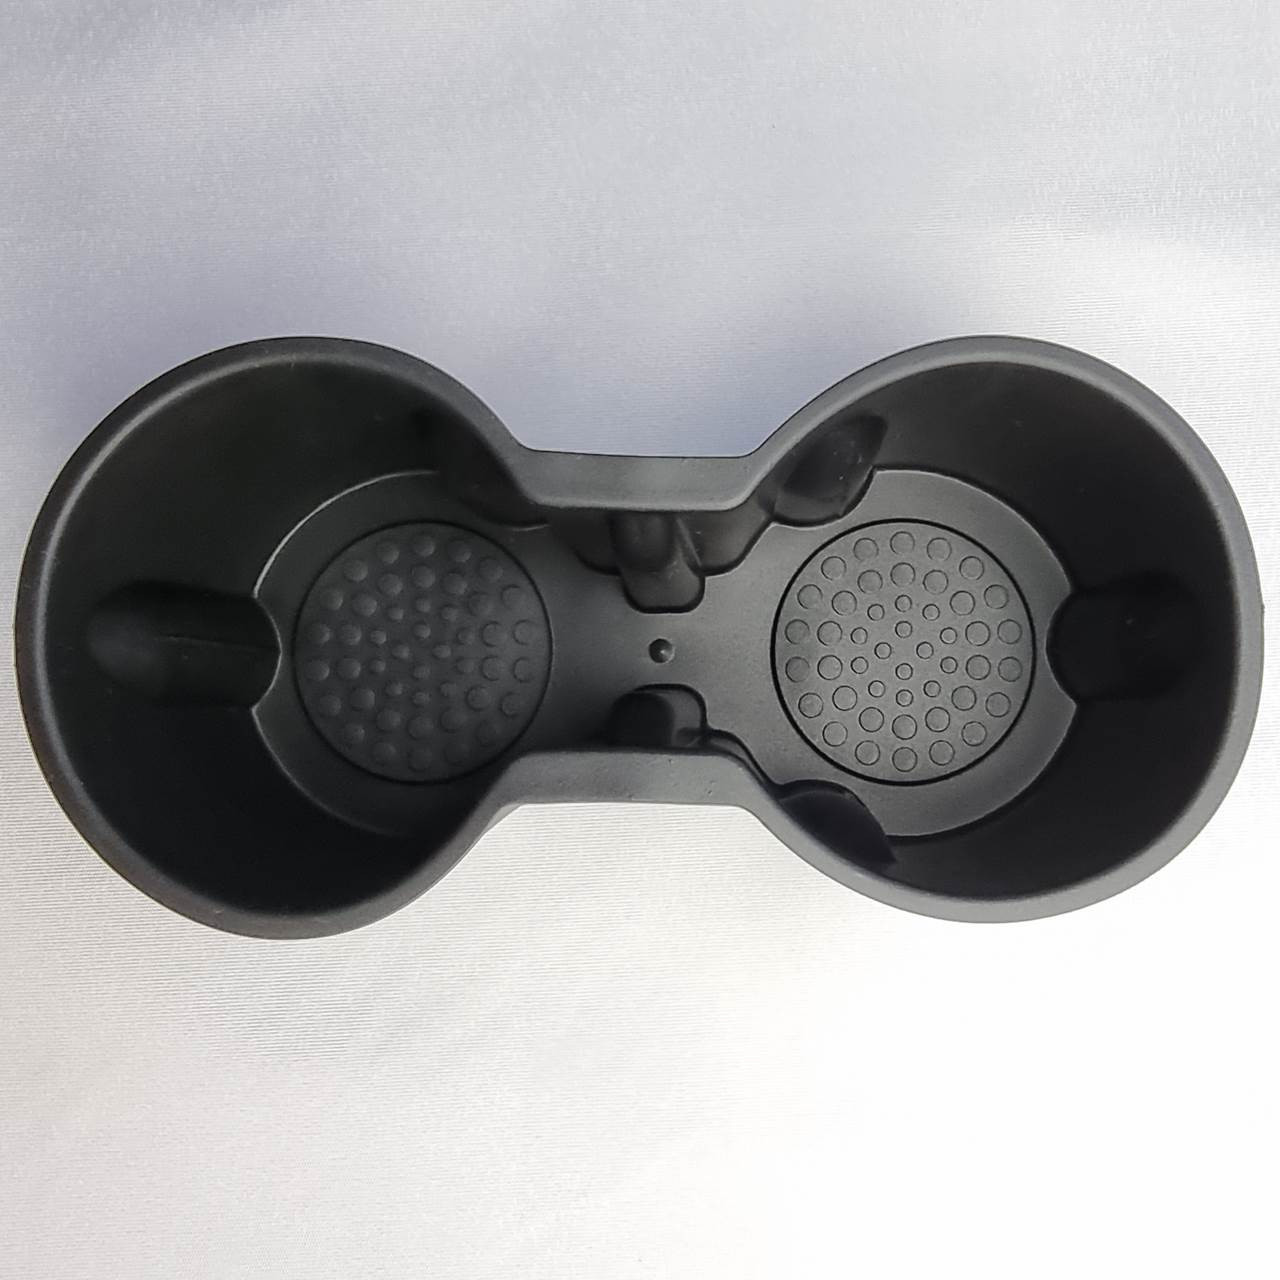 Silicone Cup Holder